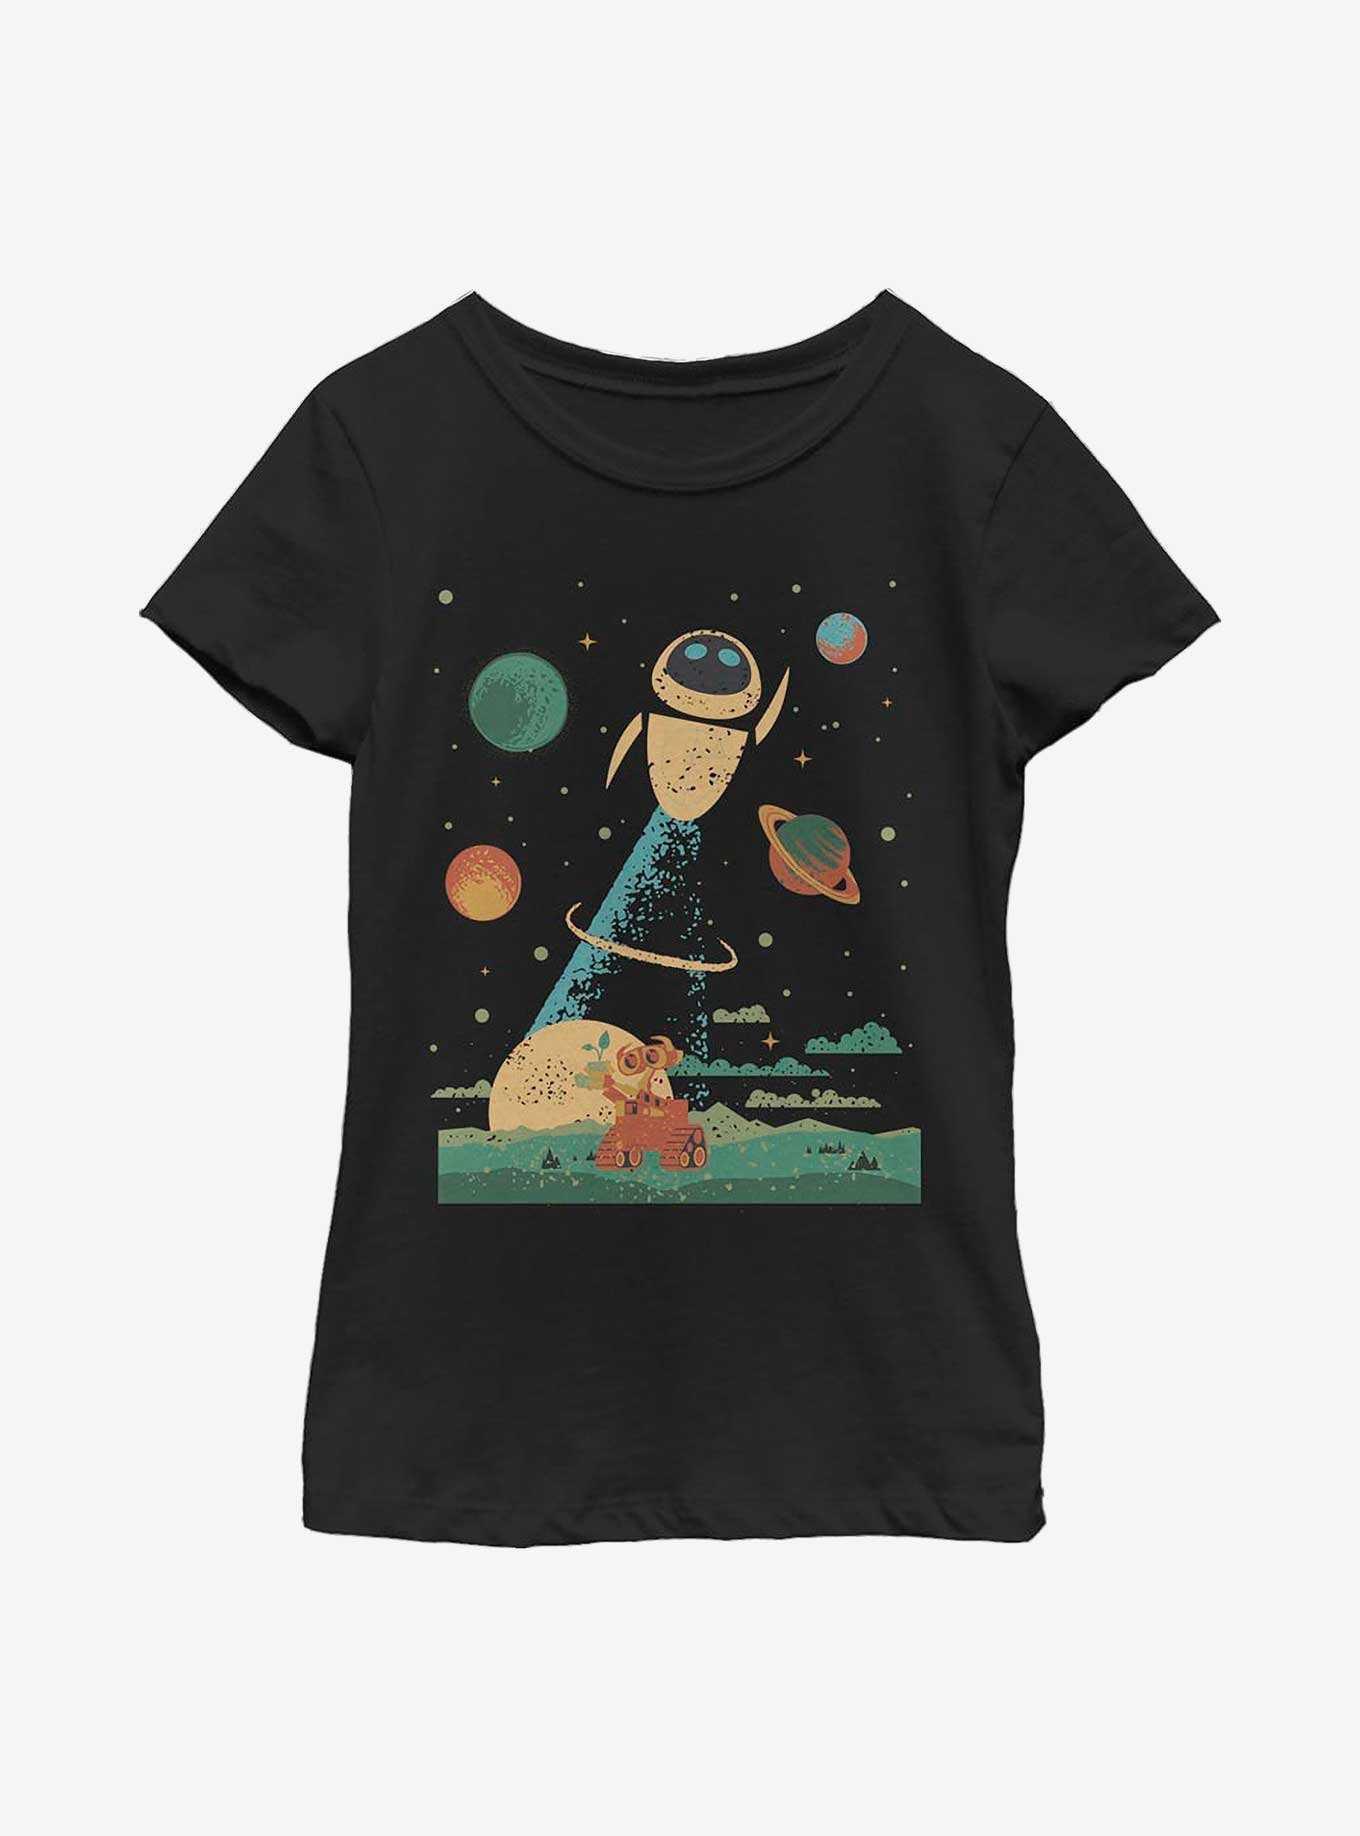 Disney Pixar Wall-E Eve and Wall-E Space Poster Youth Girls T-Shirt, , hi-res